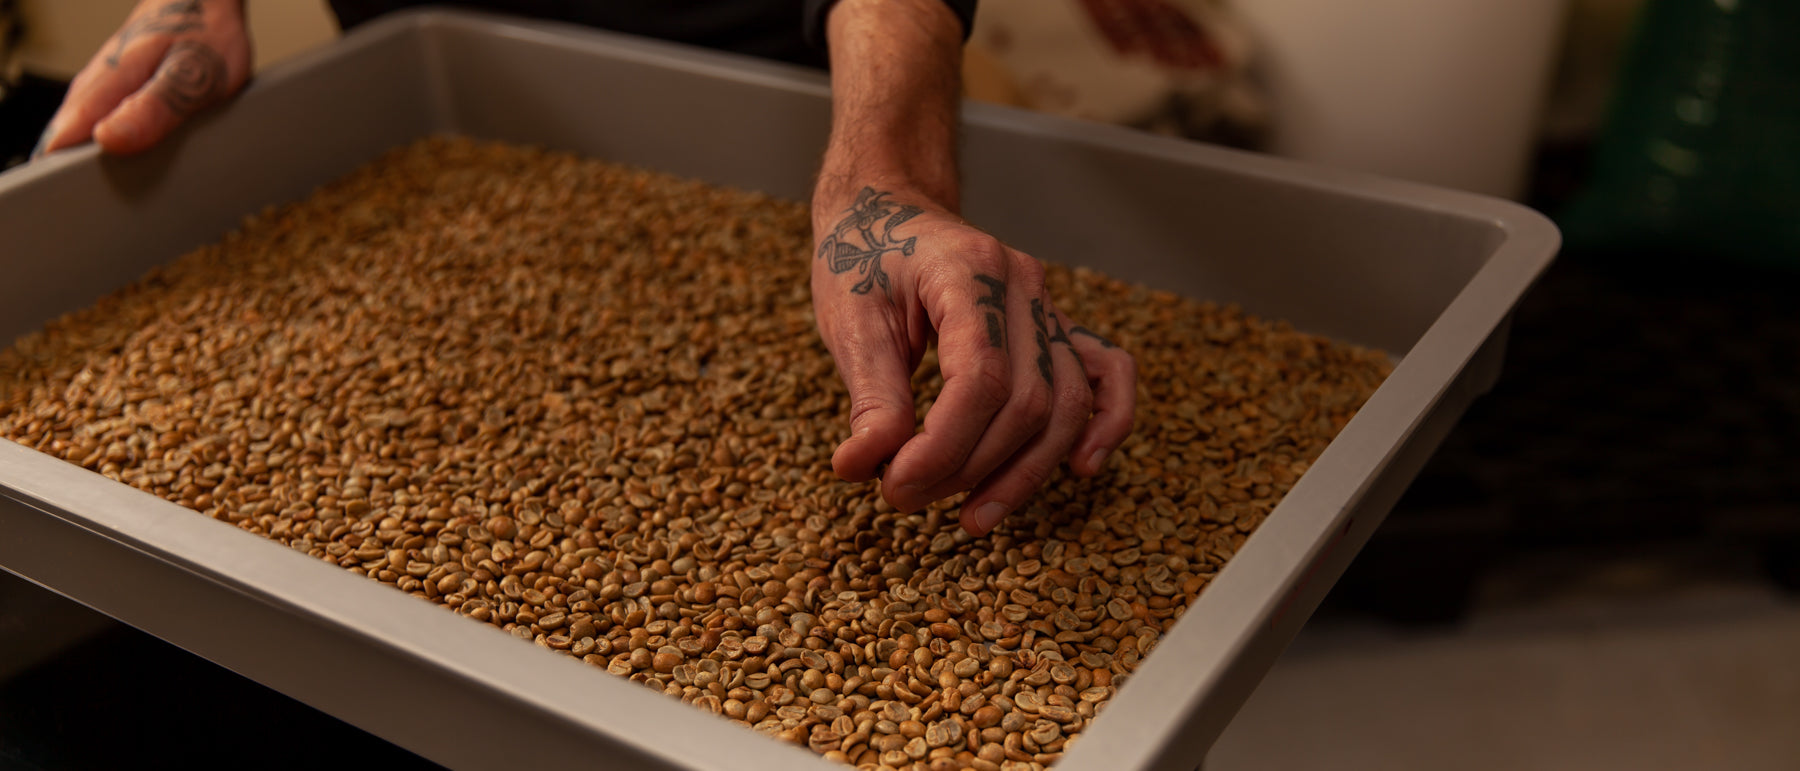 A worker's hand sorts through a tray of green coffee beans at the Loom Coffee Co. roasting facility.